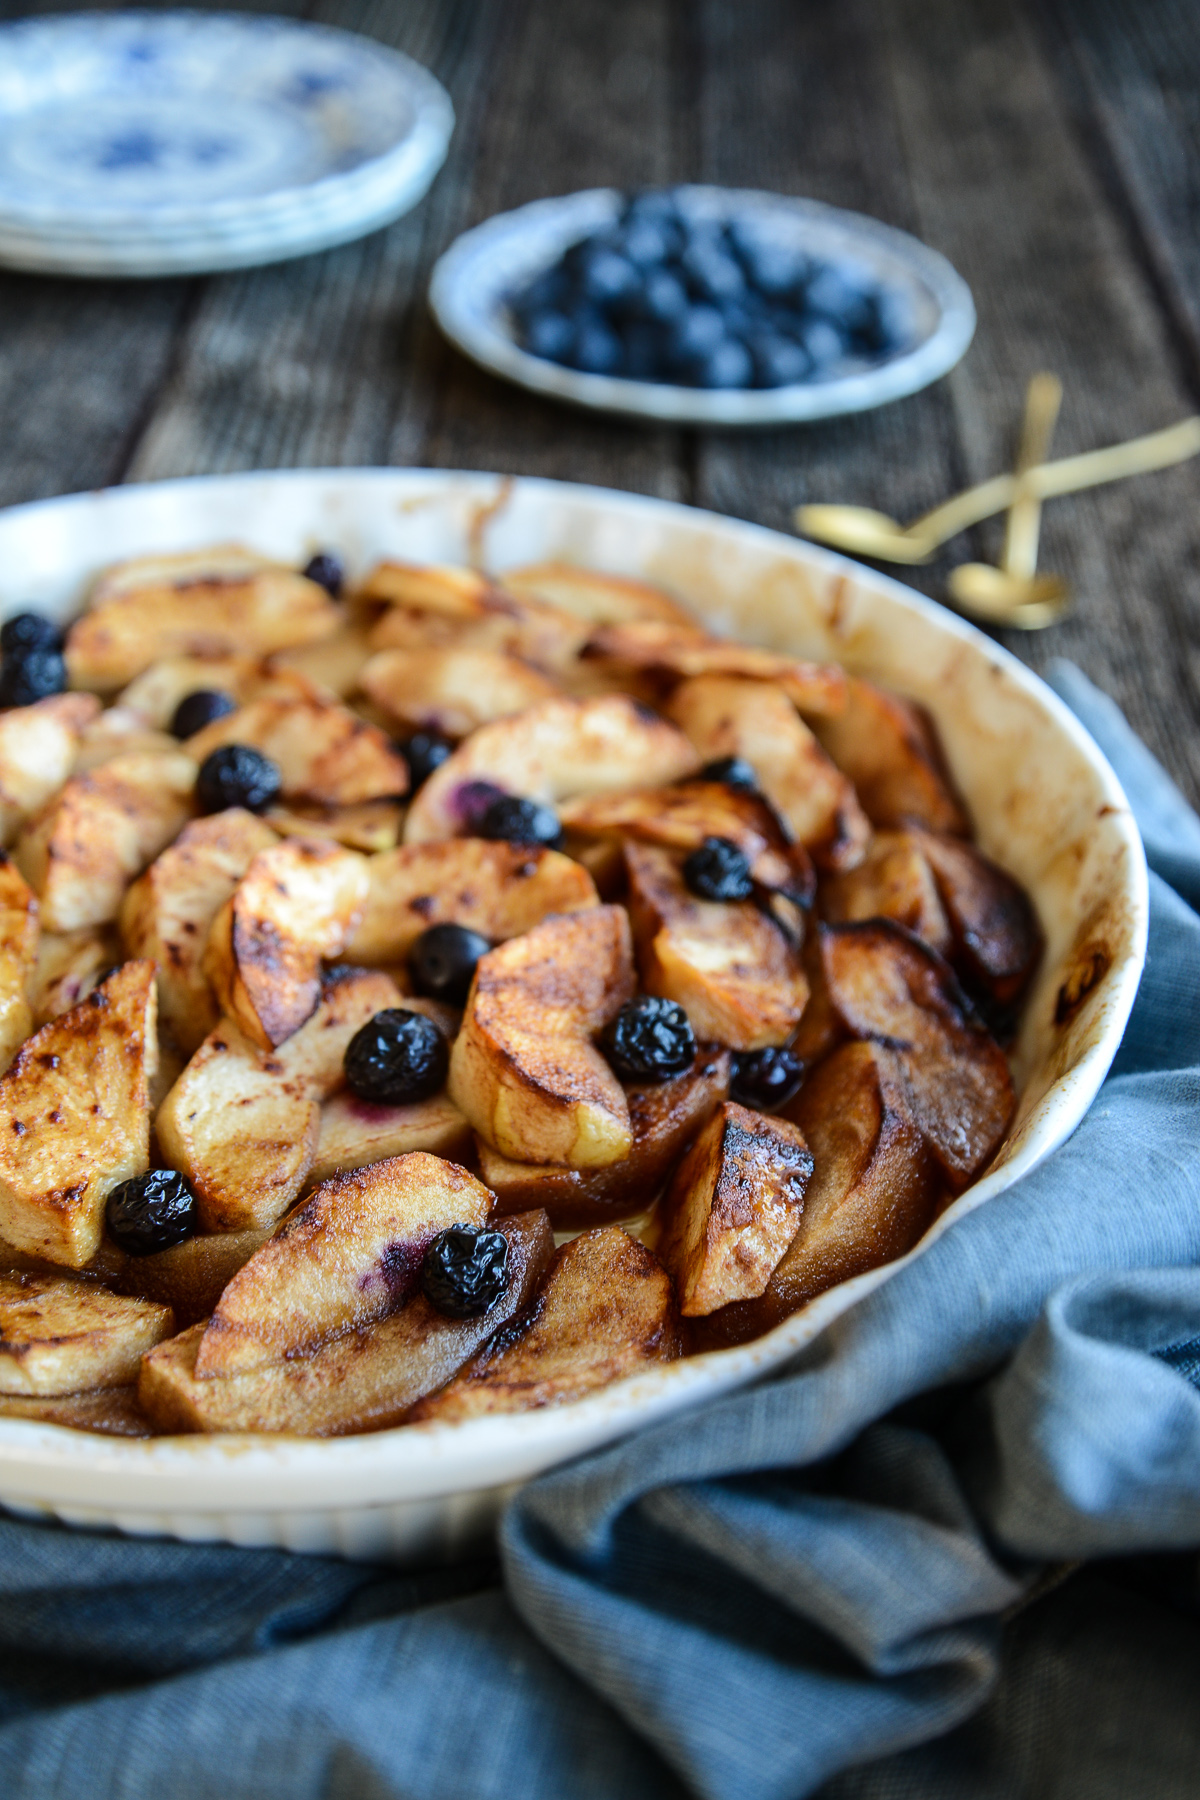 Blueberry and Apple Bake